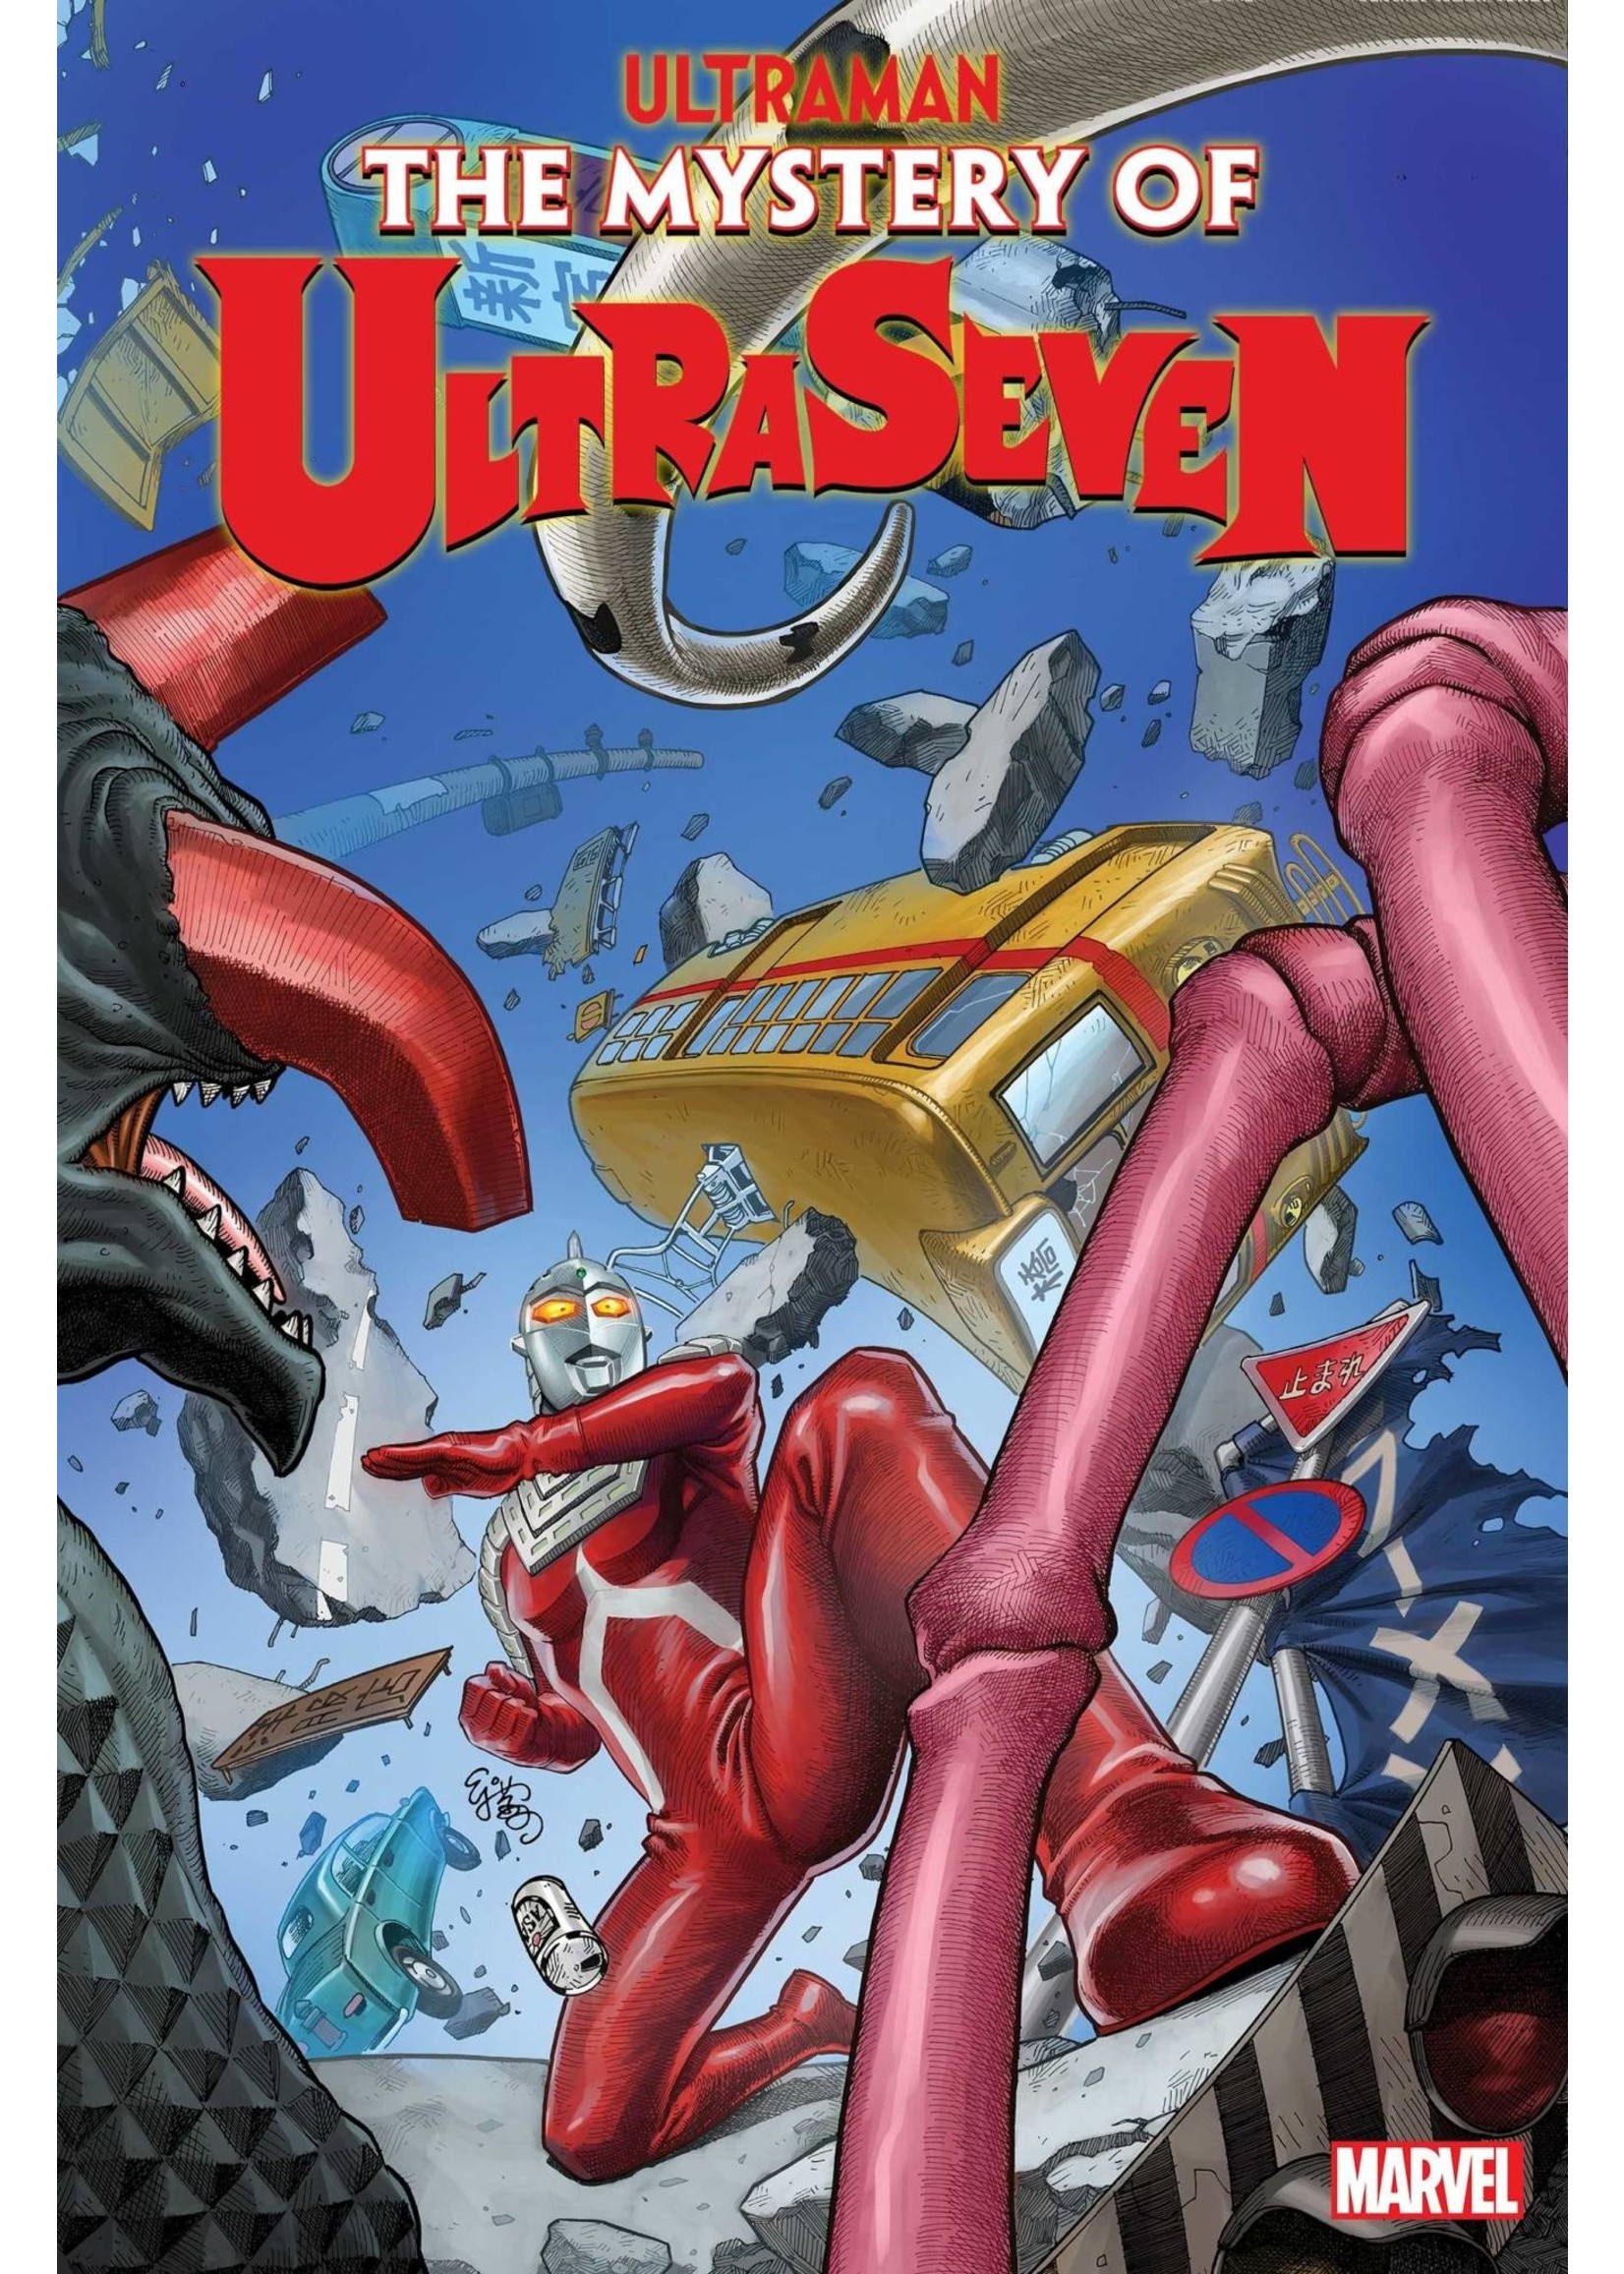 MARVEL COMICS ULTRAMAN THE MYSTERY OF ULTRASEVEN complete 5 series